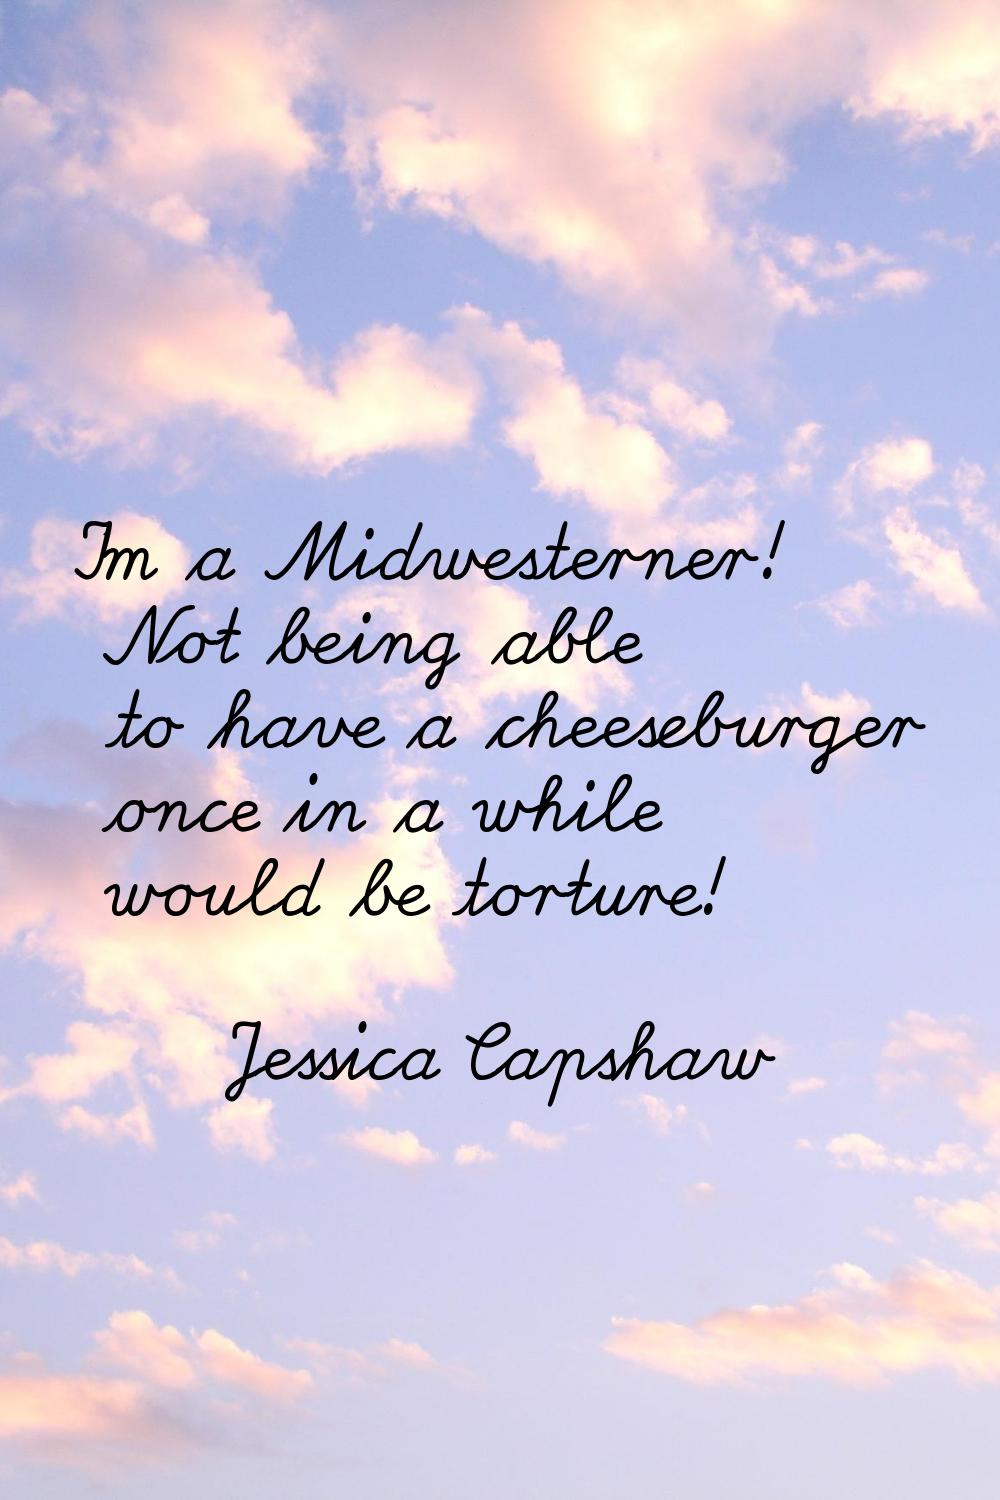 I'm a Midwesterner! Not being able to have a cheeseburger once in a while would be torture!